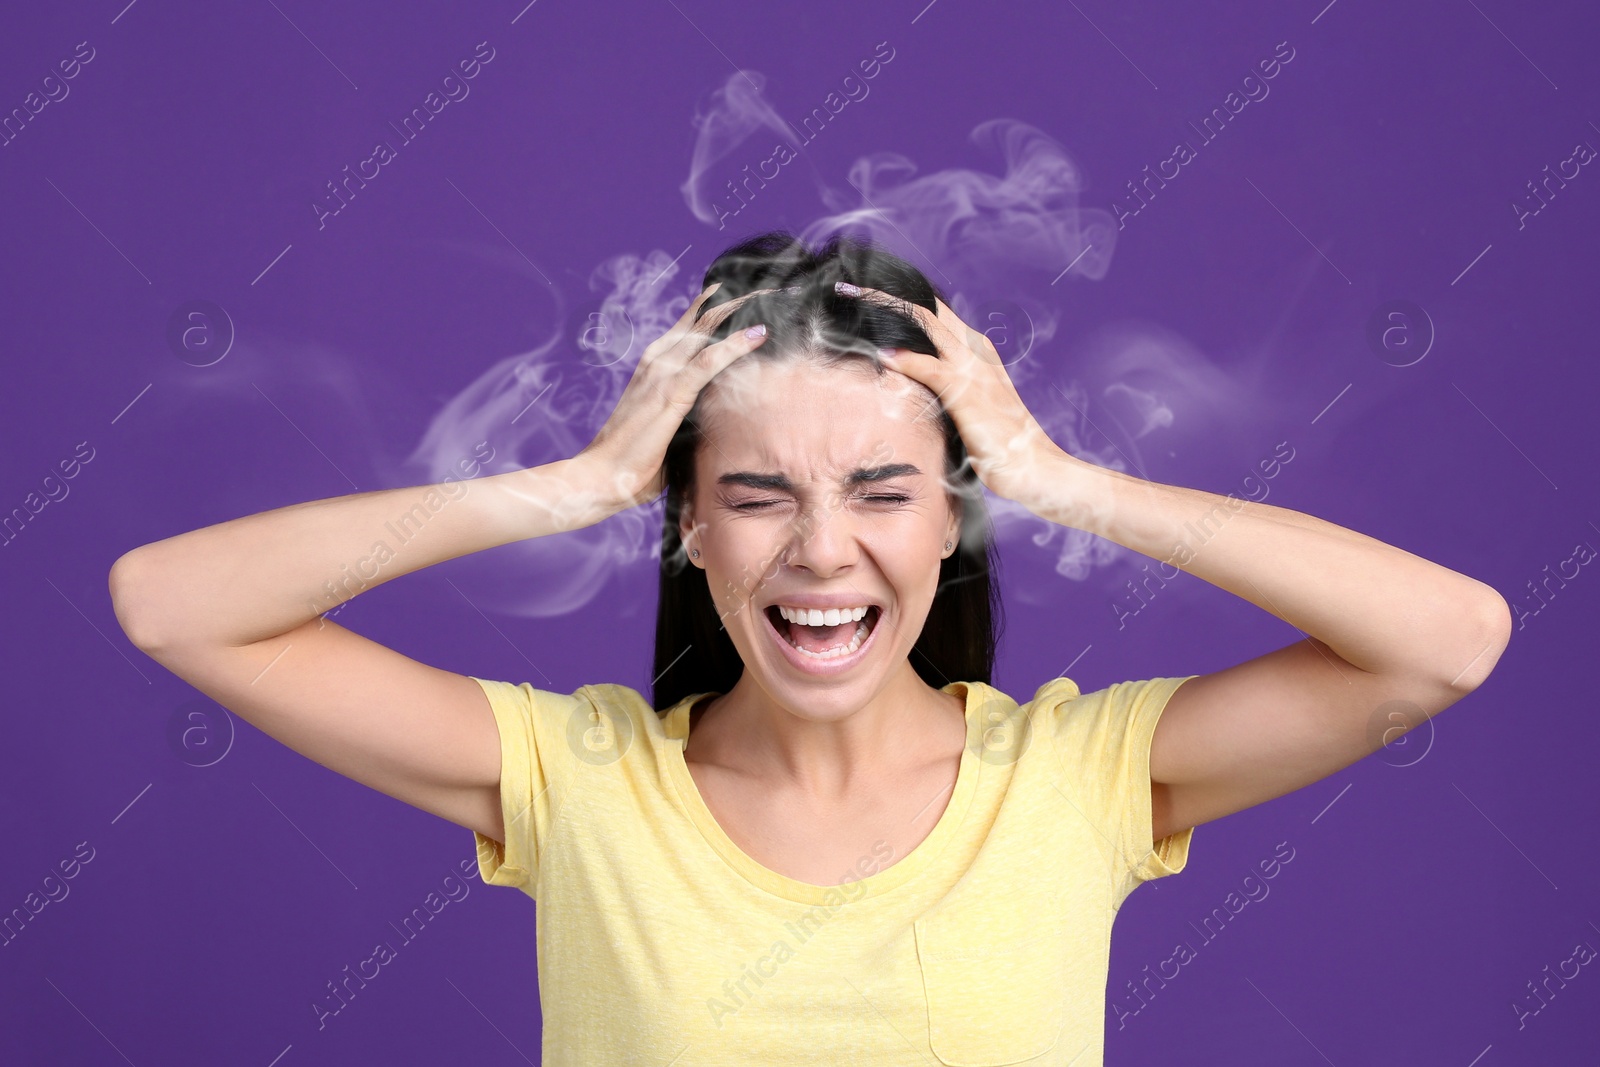 Image of Stressed and upset young woman on violet background